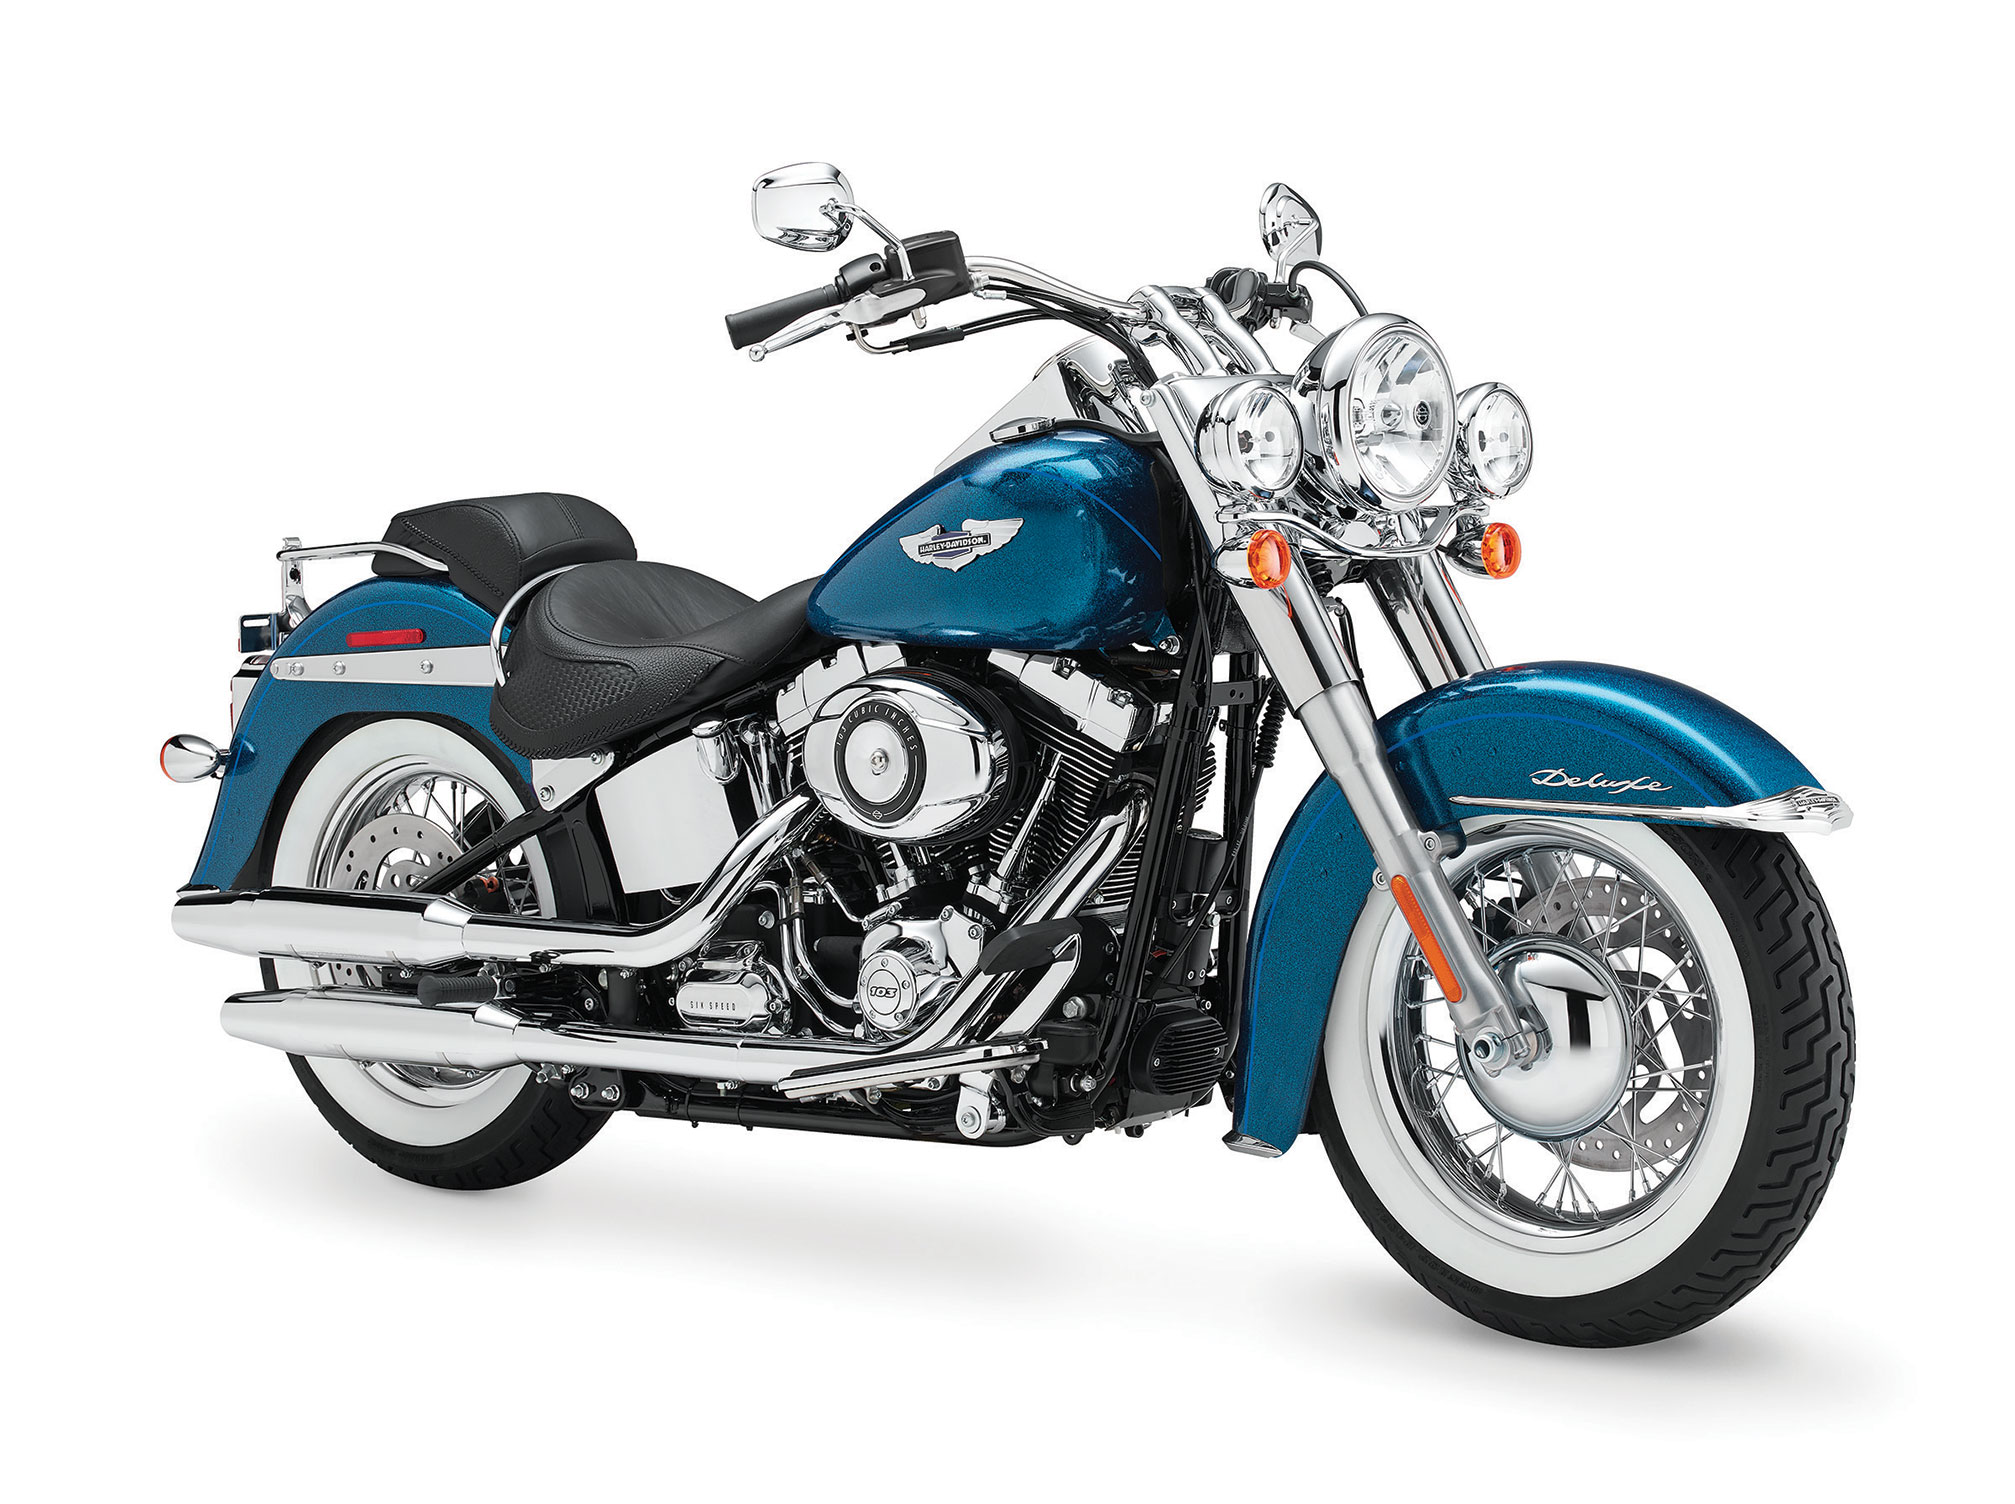 Harley Davidson Softail Deluxe Wallpapers Vehicles Hq Harley Davidson Softail Deluxe Pictures 4k Wallpapers 2019